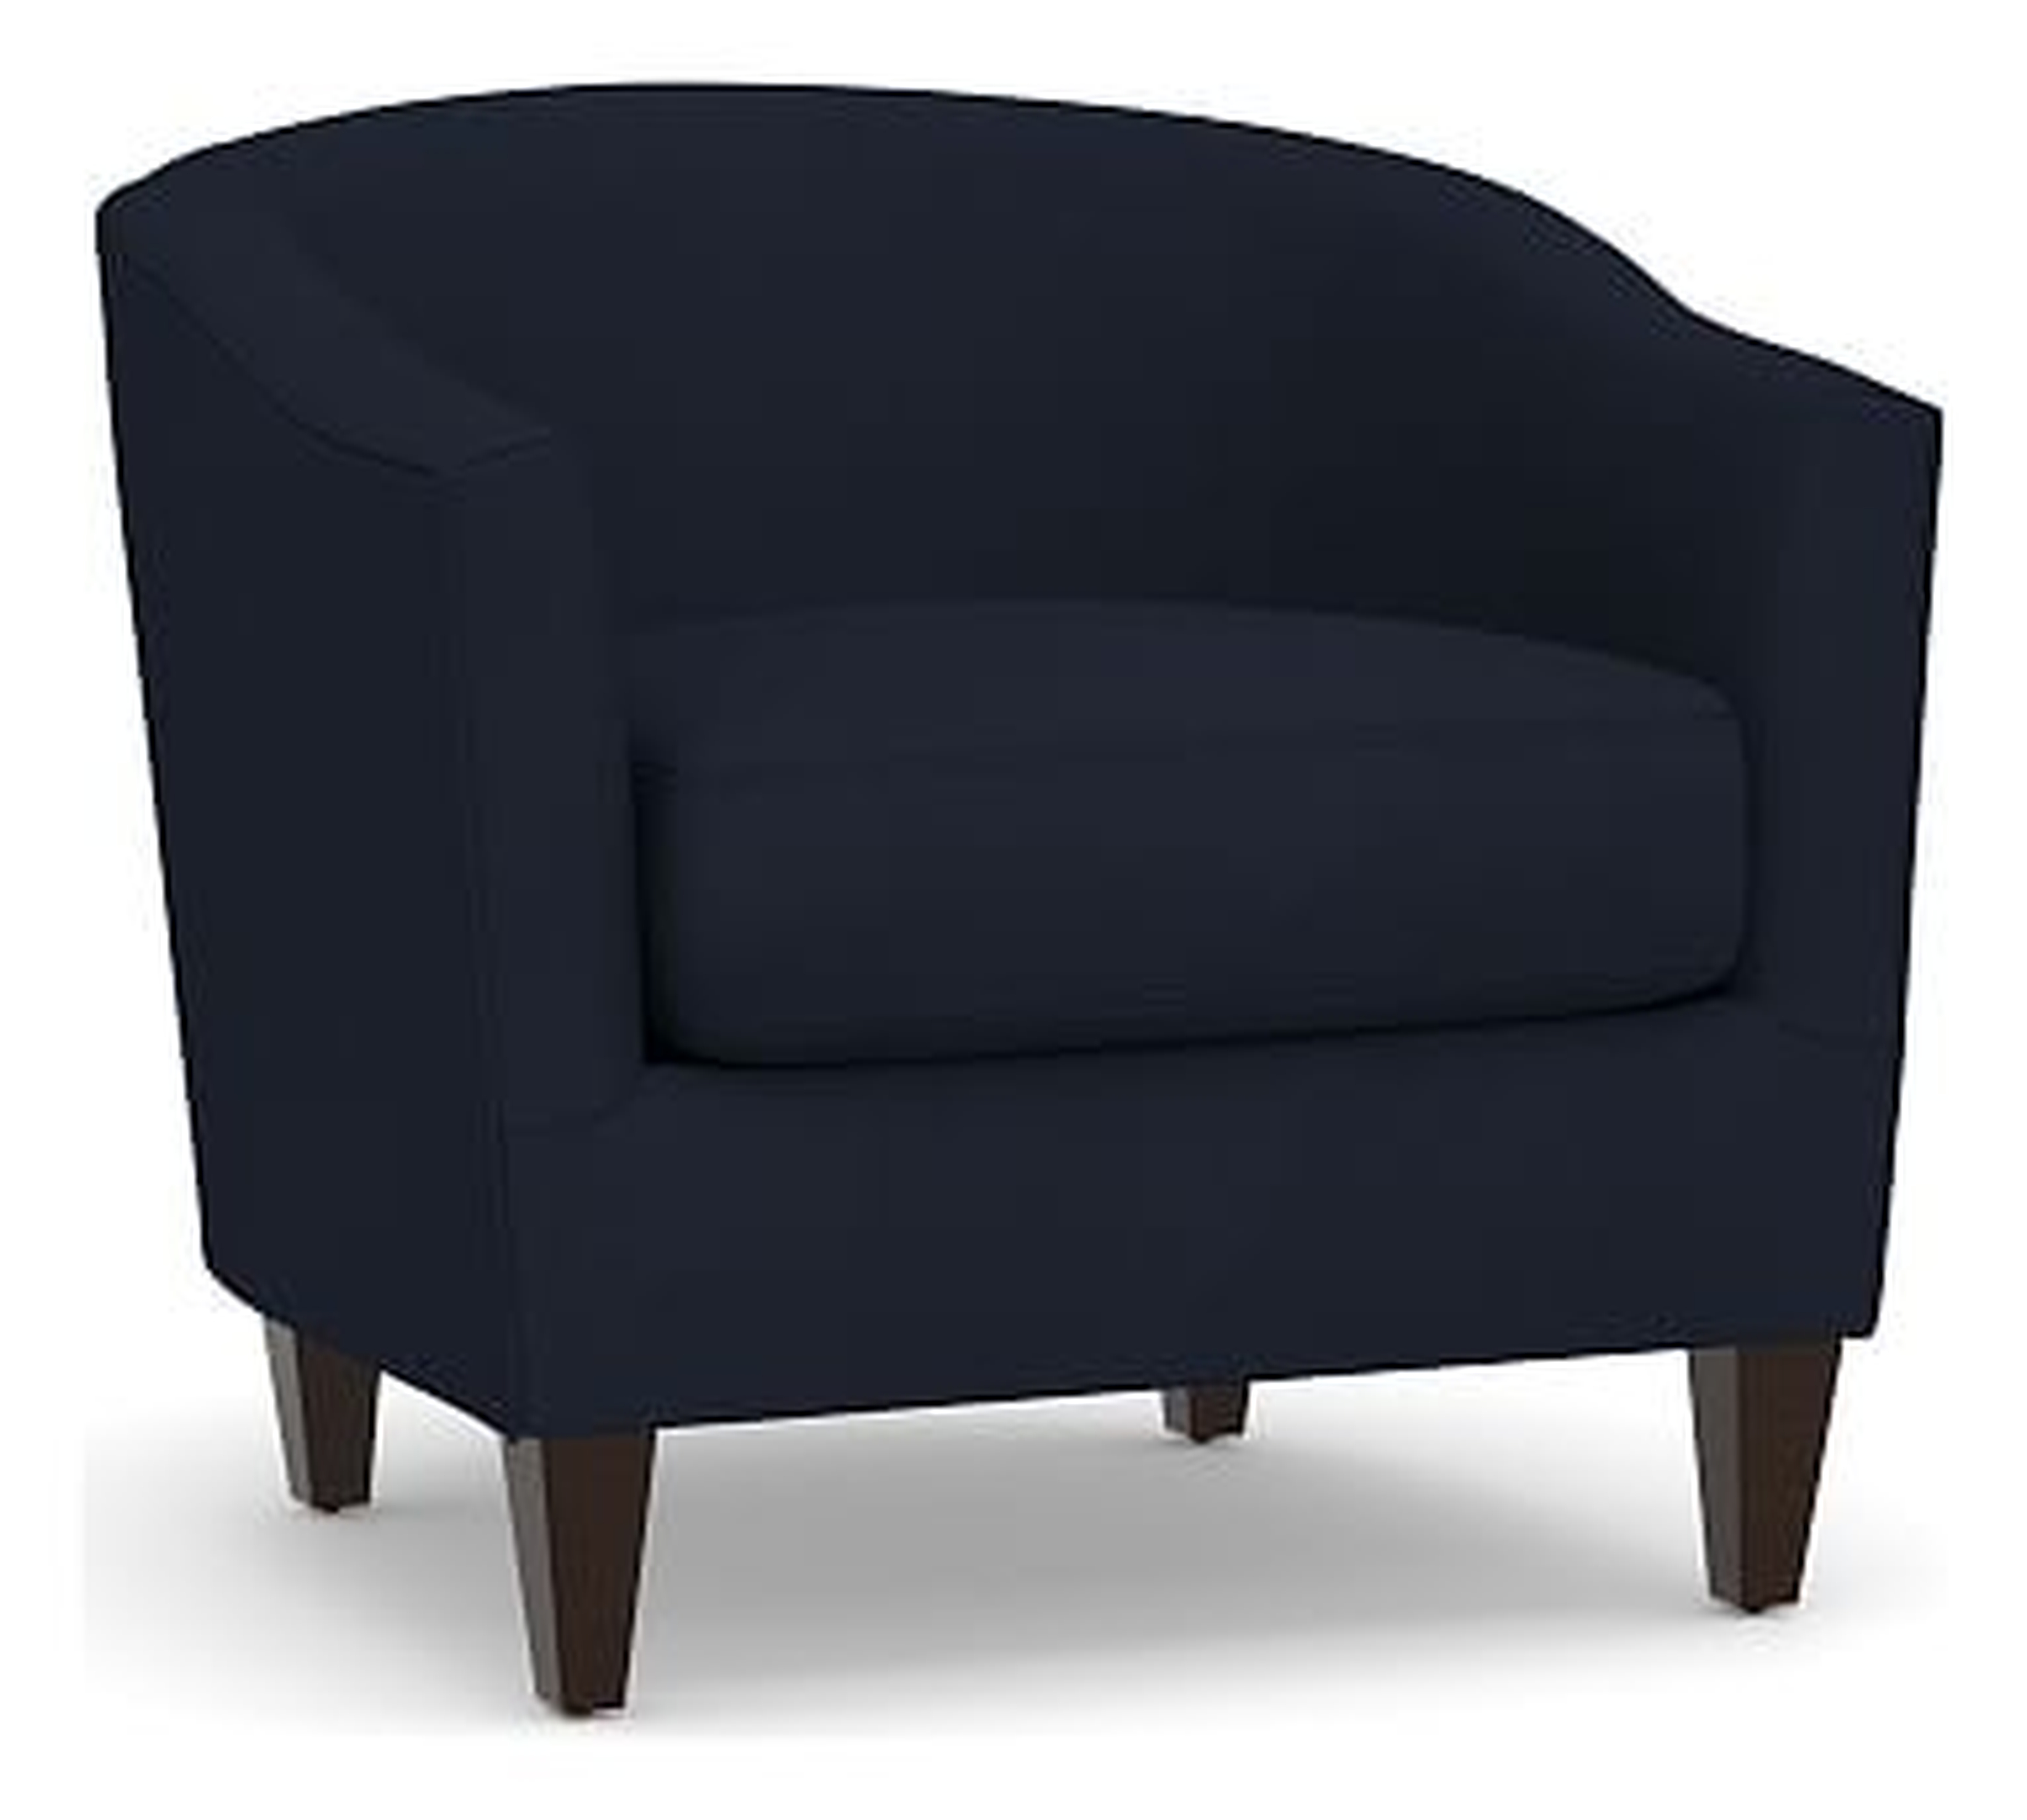 Harlow Upholstered Armchair, Polyester Wrapped Cushions, Twill Cadet Navy - Pottery Barn